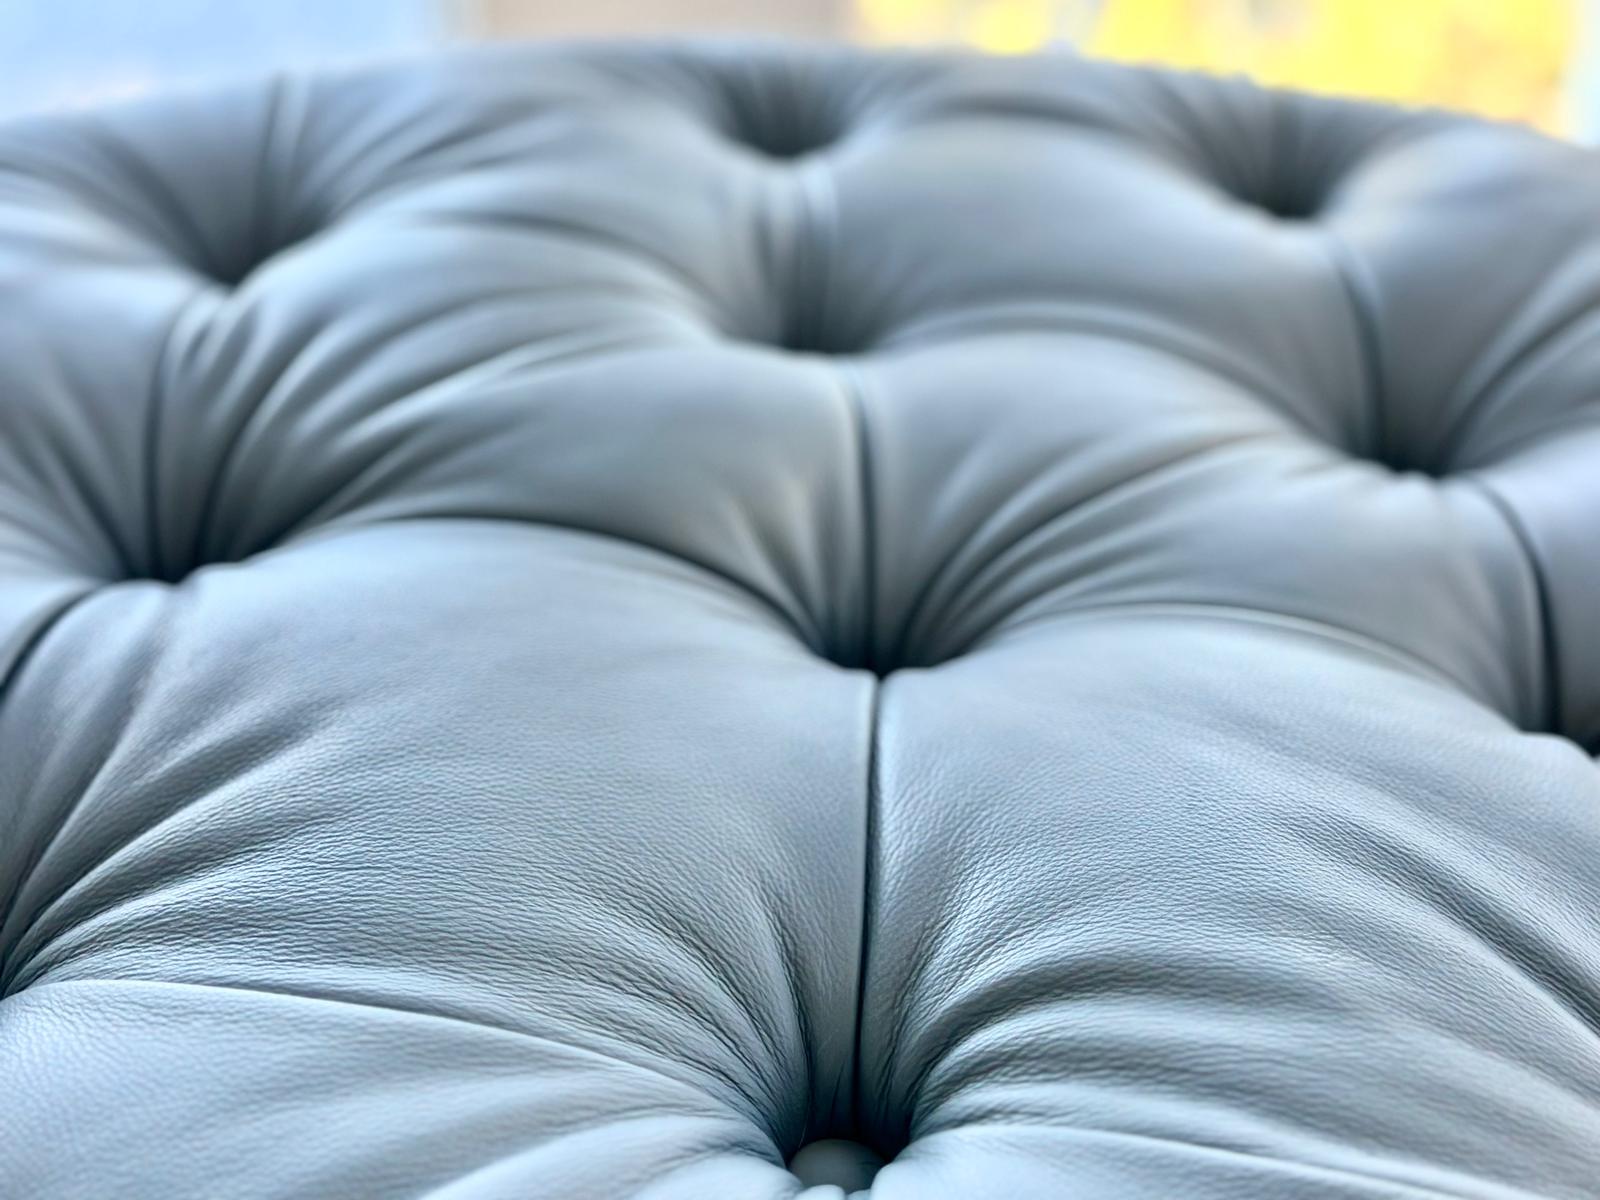 round leather tufted ottoman DIY upholstery project